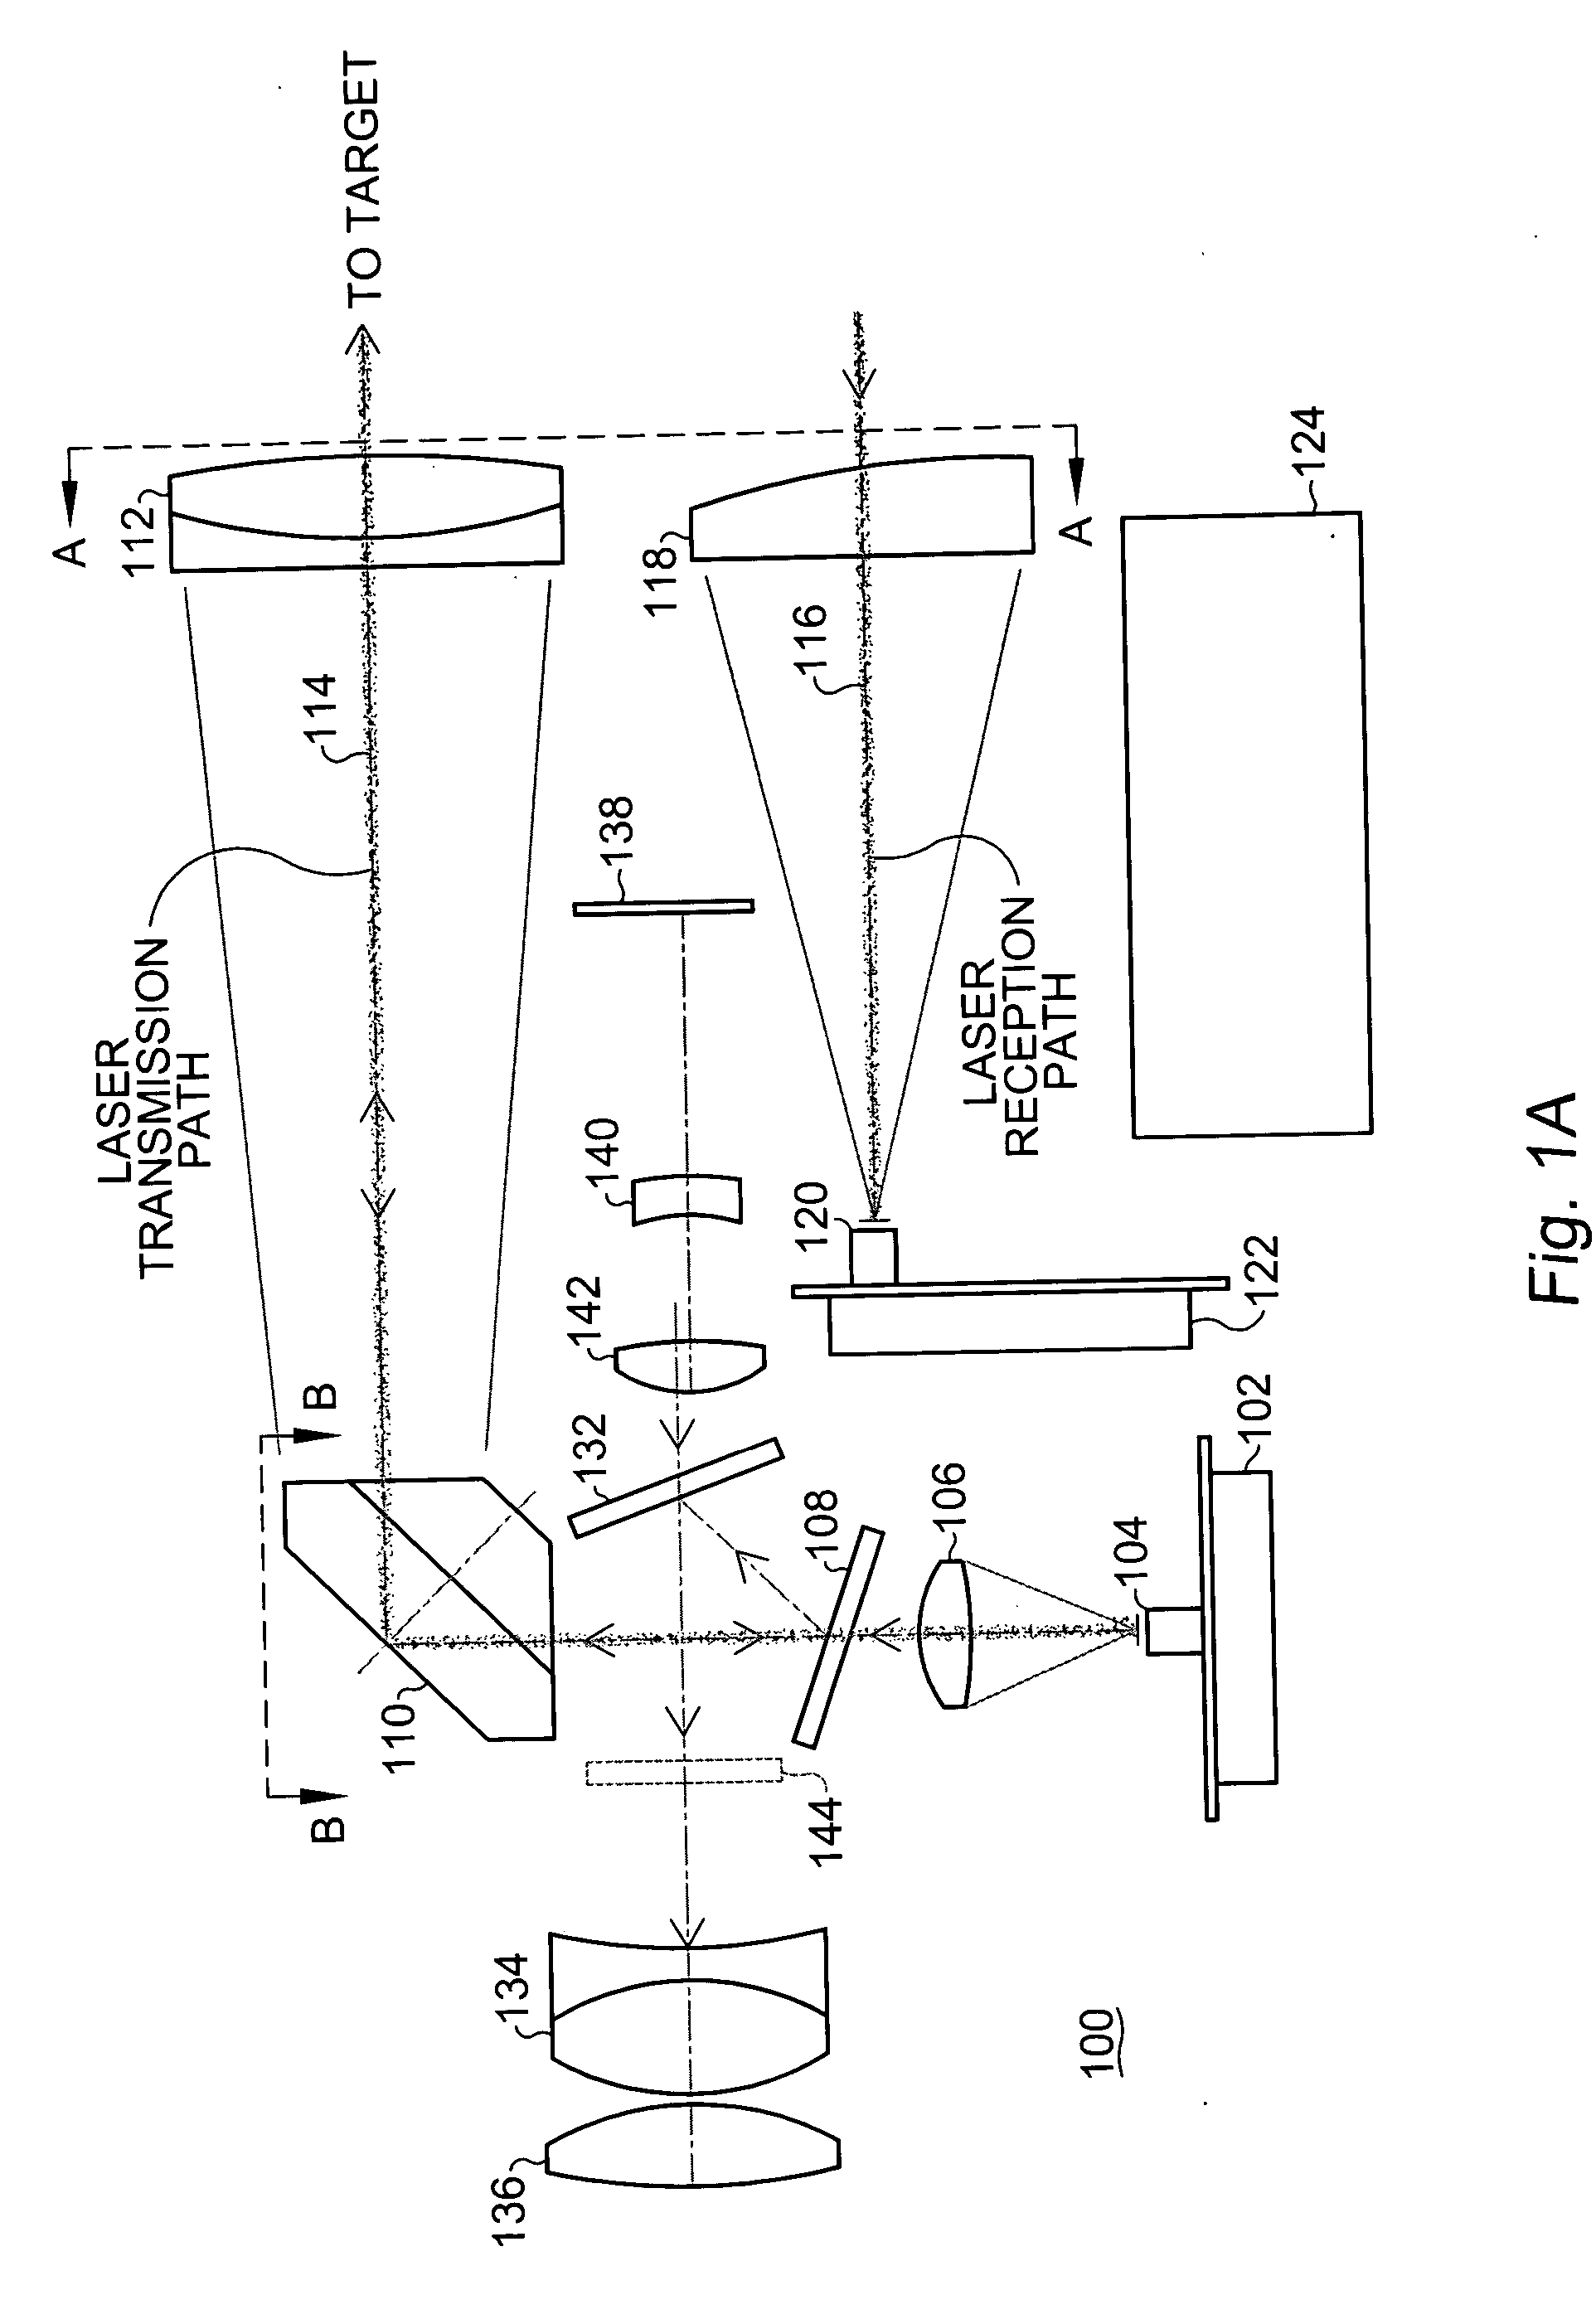 Efficient optical system and beam pathway design for laser-based distance measuring device